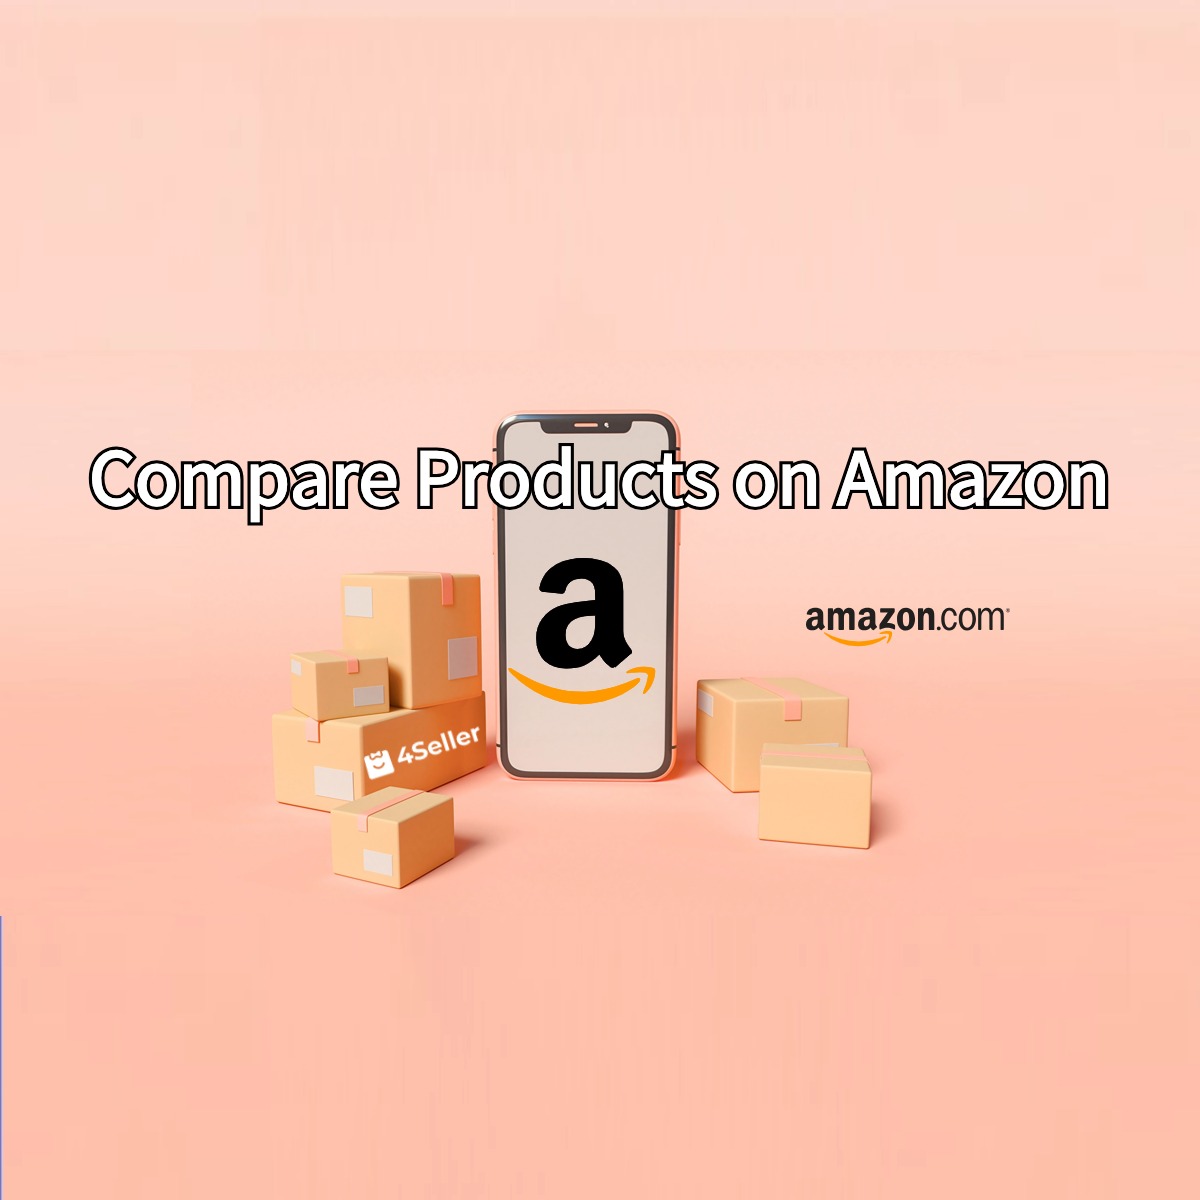 How to Find Similar Products on Amazon? Compare Products on Amazon